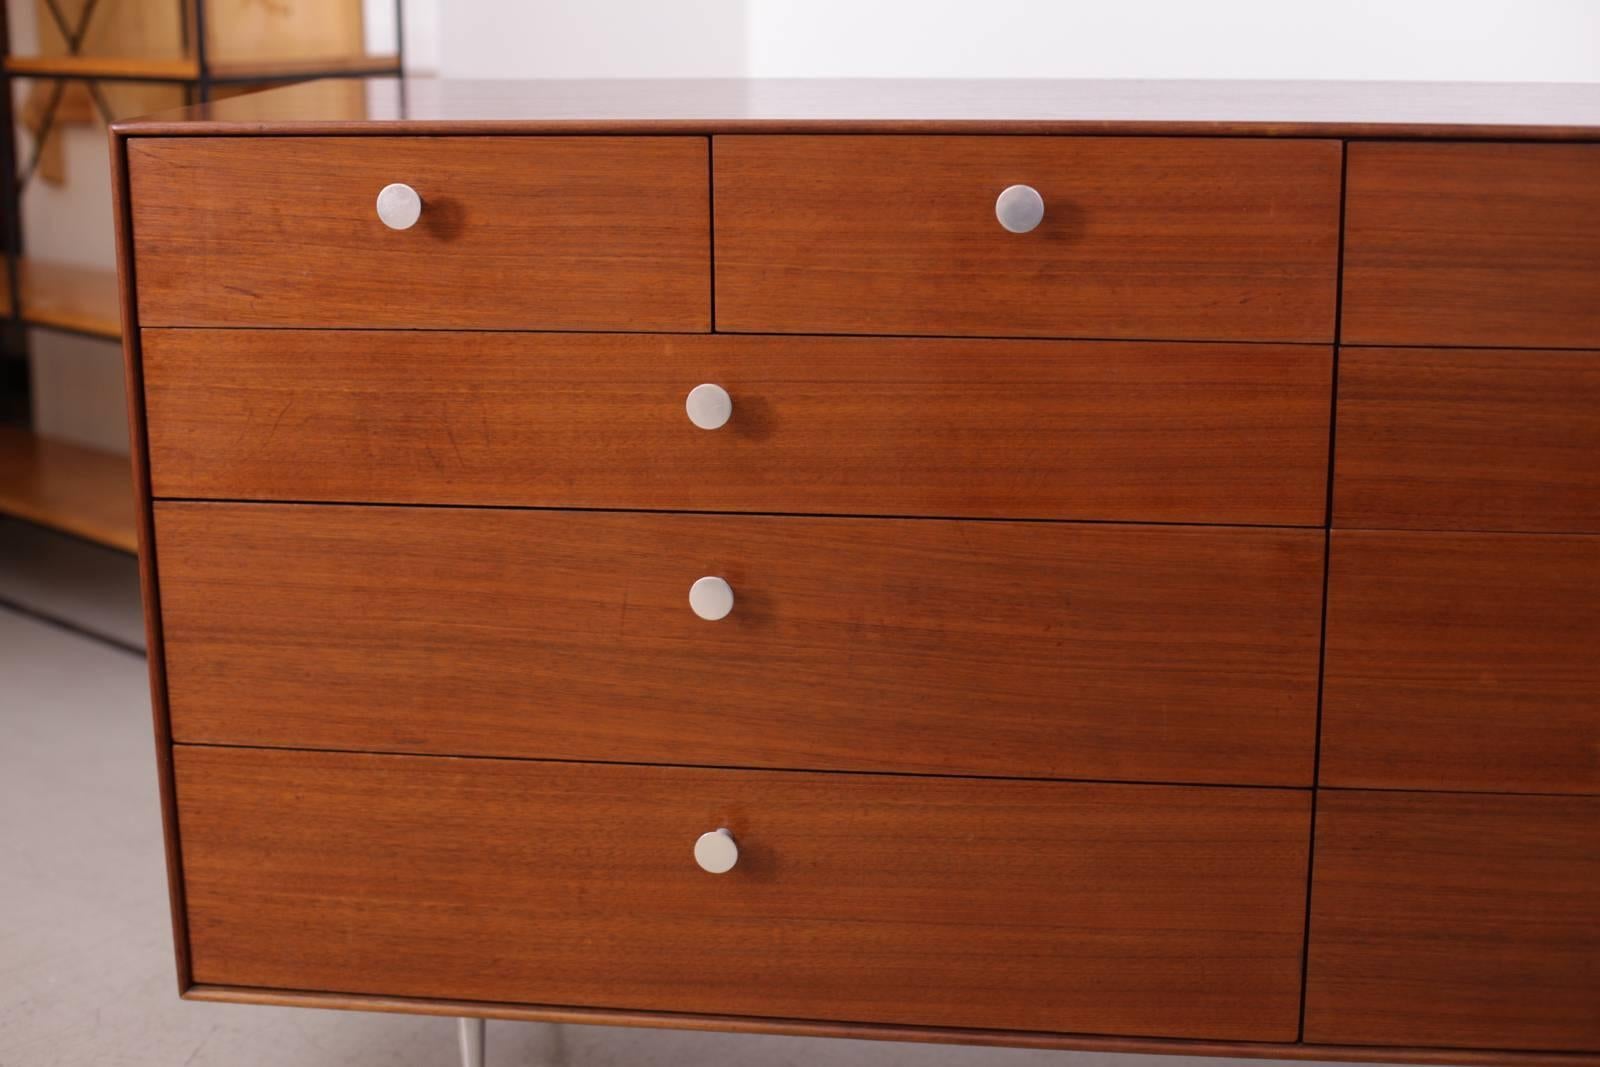 Aluminum George Nelson Thin Edge Chest of Drawers in Walnut by Herman Miller